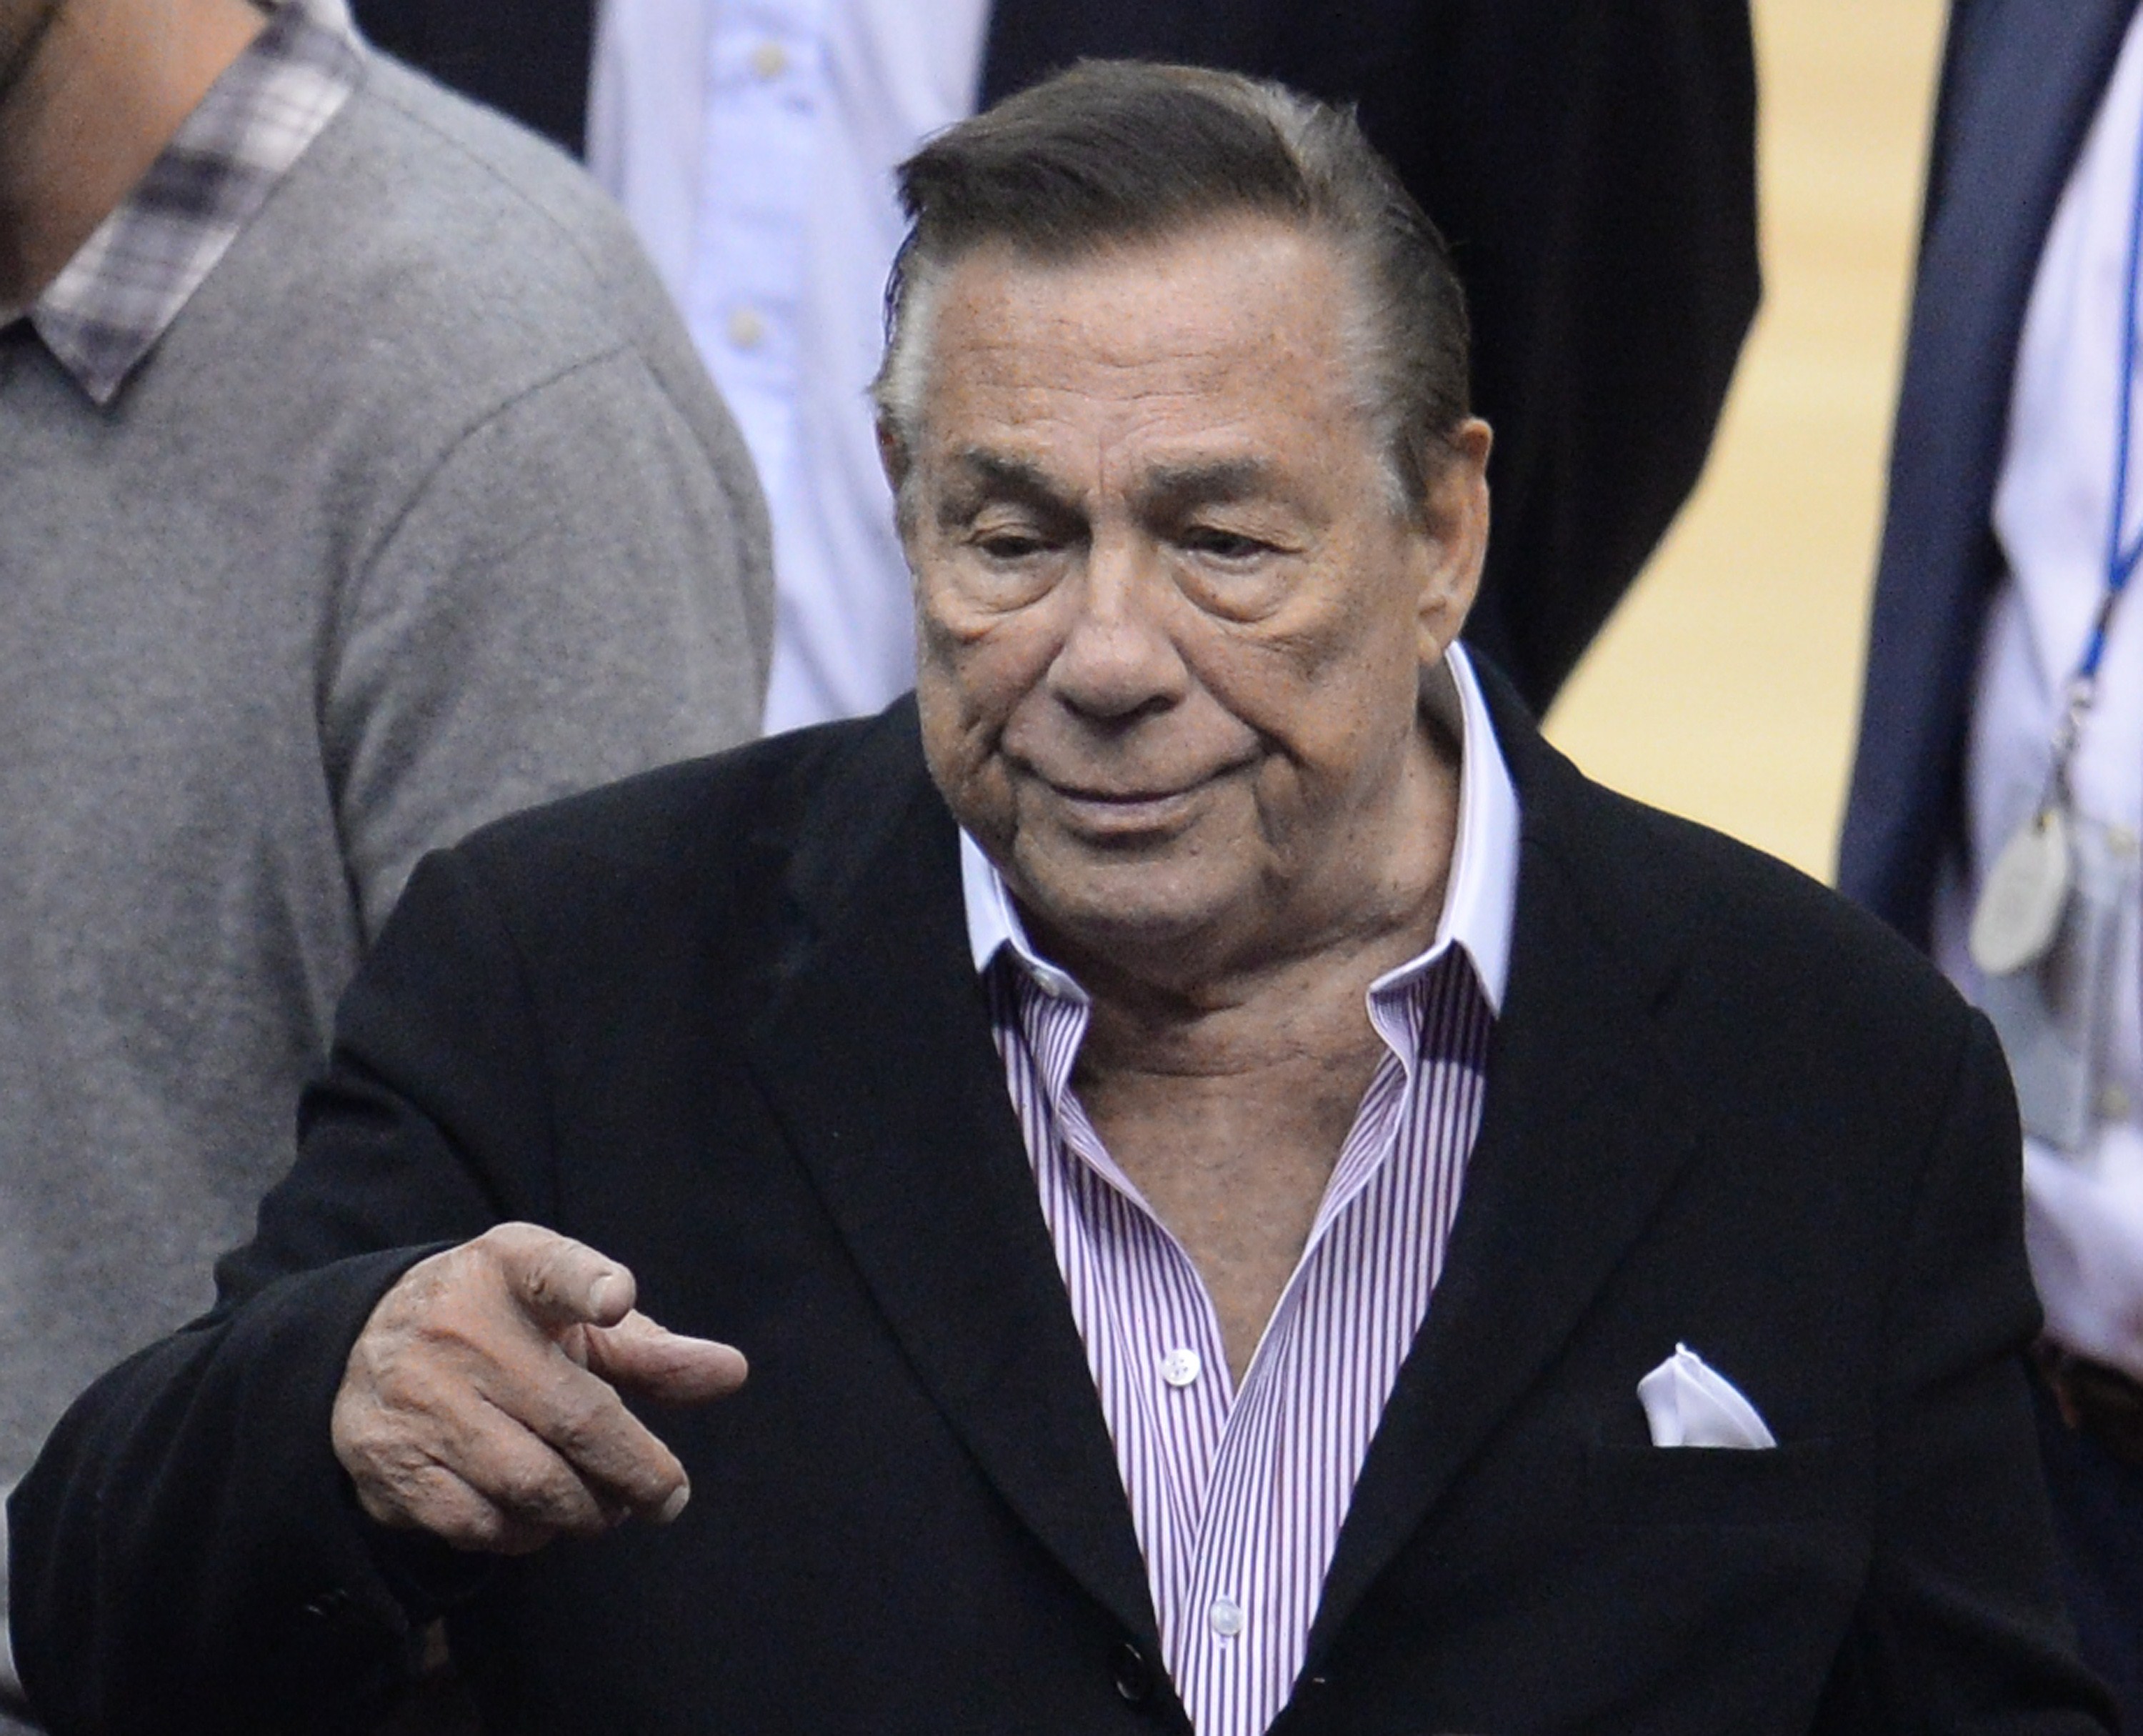 Los Angeles Clippers owner Donald Sterling attends the NBA playoff game between the Clippers and the Golden State Warriors on April 21, 2014 at Staples Center in Los Angeles. (ROBYN BECK&mdash;AFP/Getty Images)